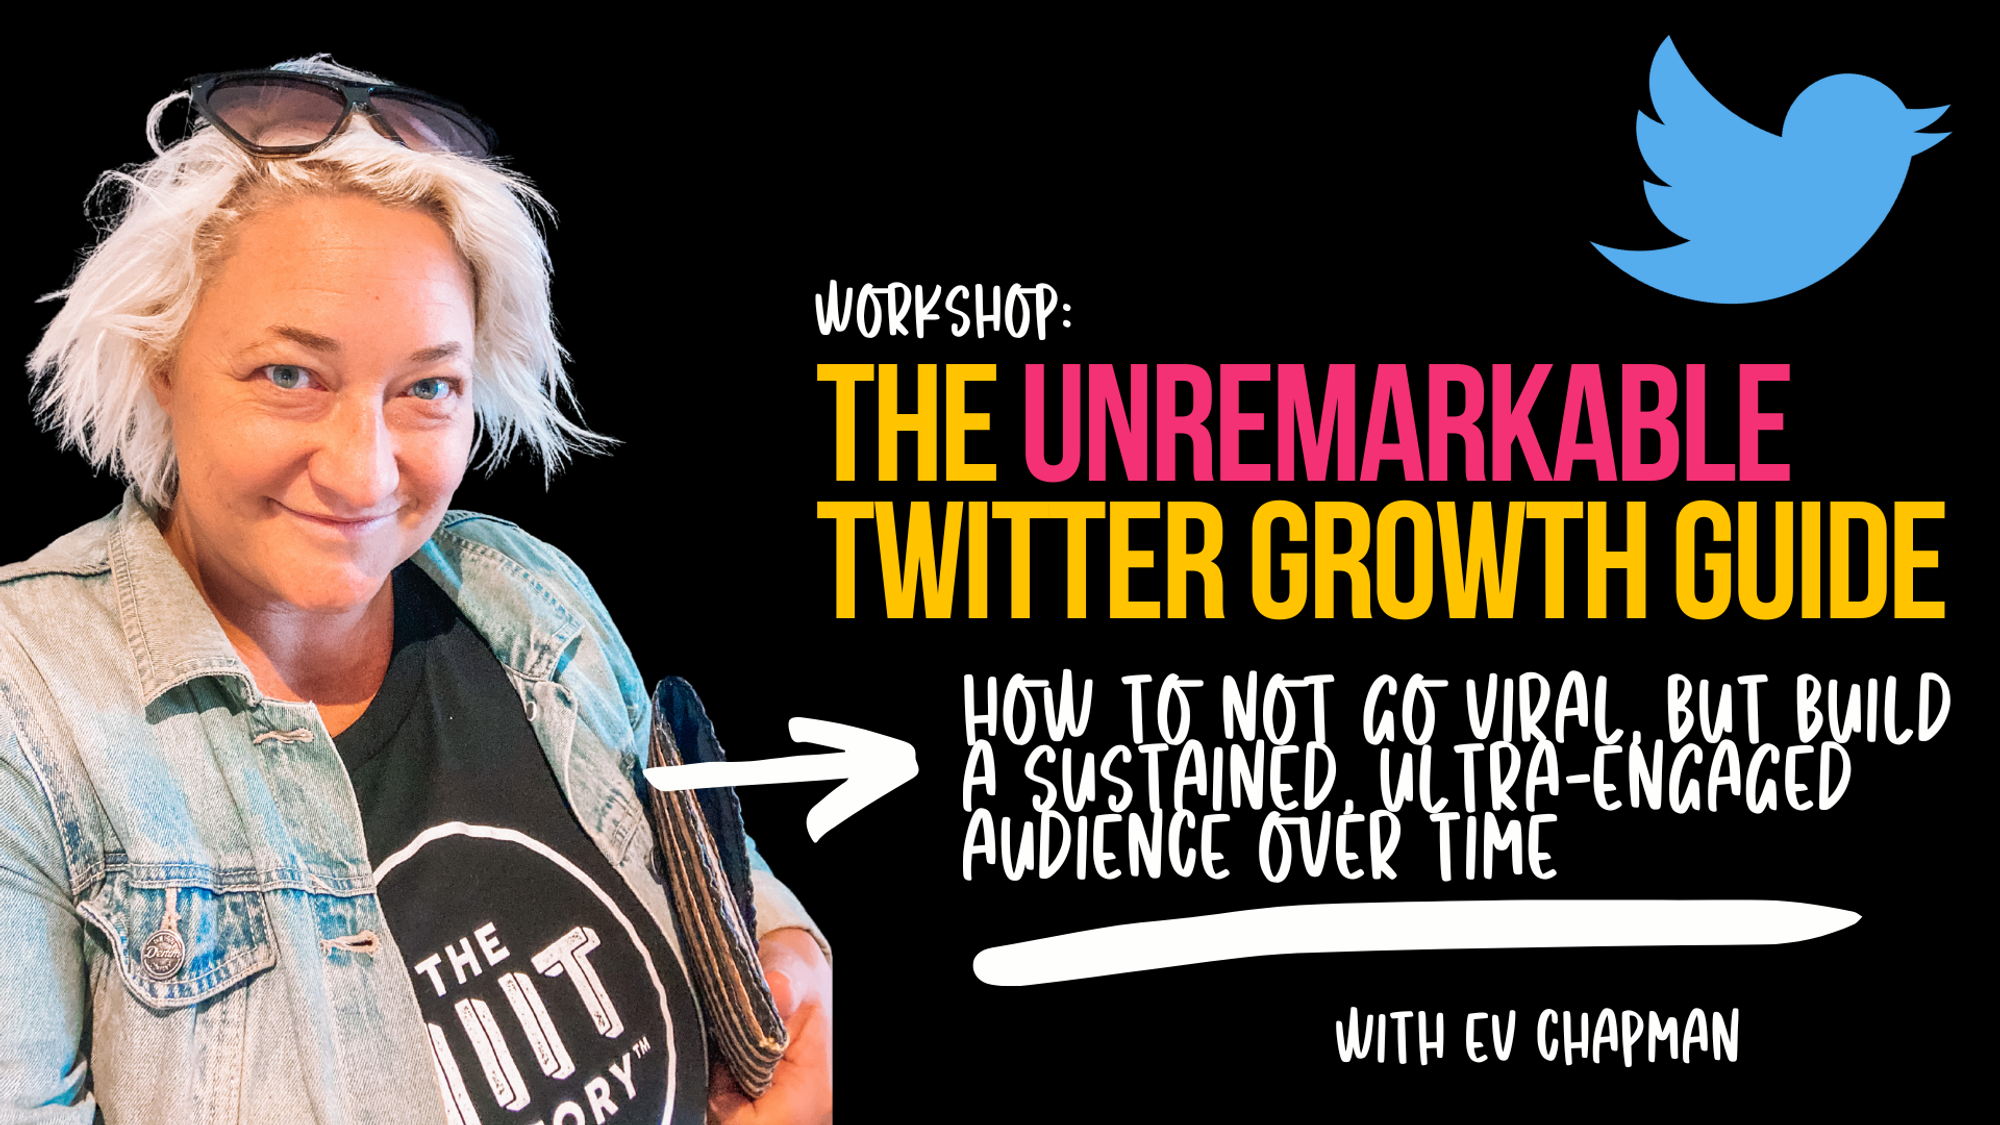 Workshop: The Unremarkable Twitter Growth Guide